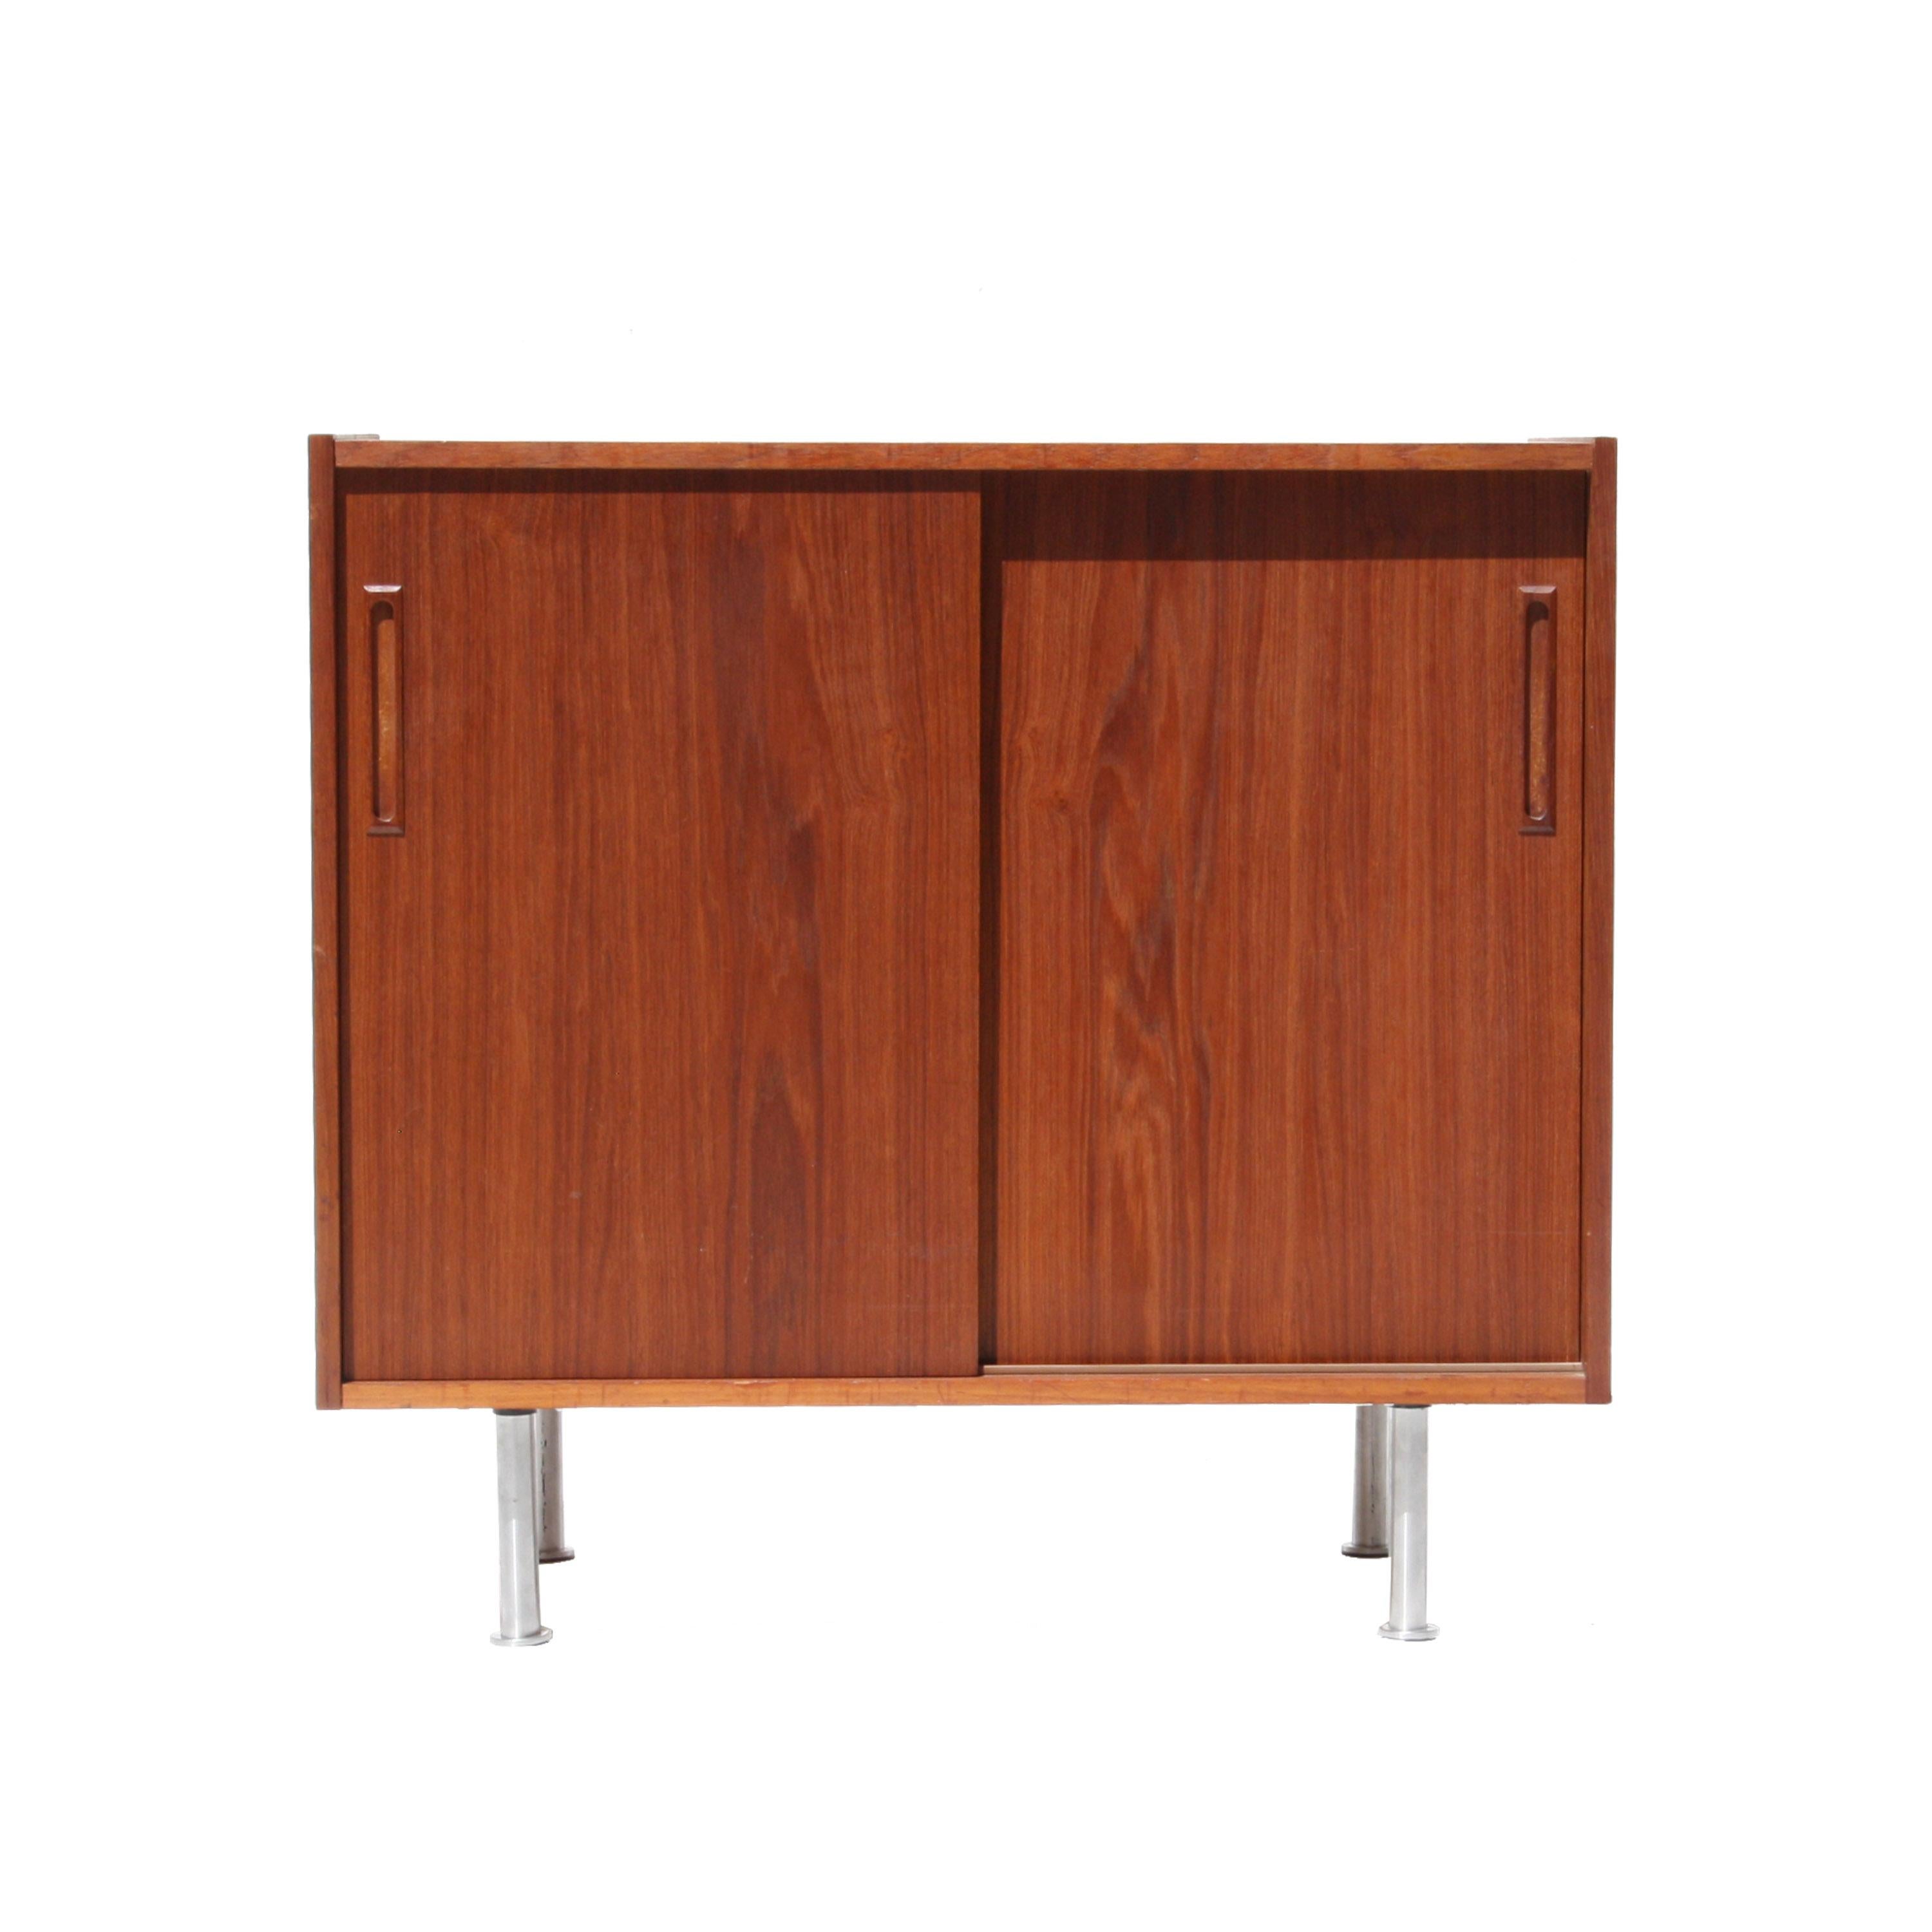 Pair of sideboards made of teak with two sliding doors and rectangular handles. Steel legs.